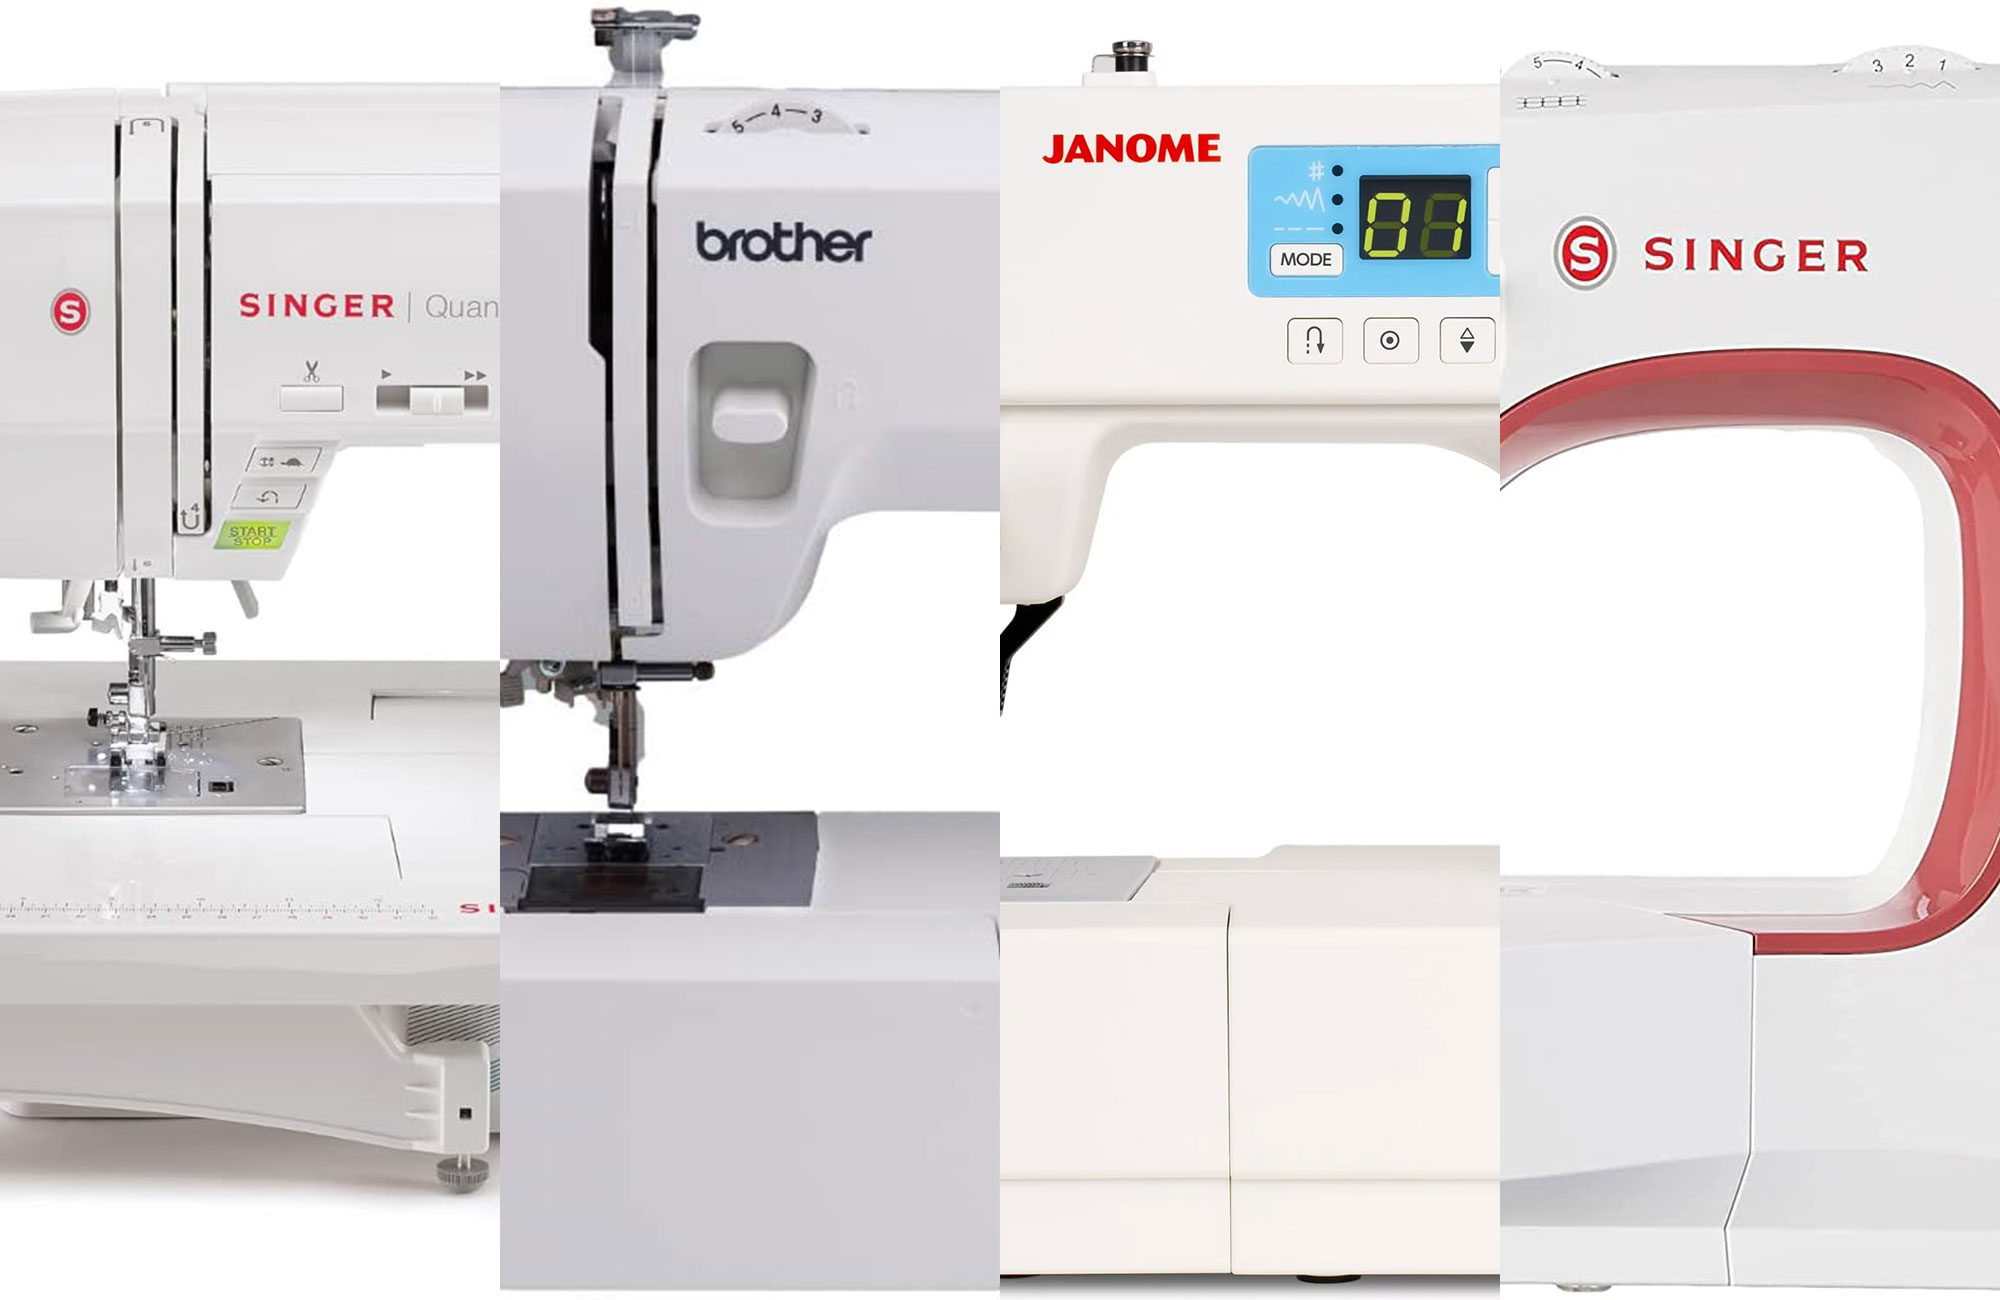 Janome Sewing Machine Guide - The Sewing Directory